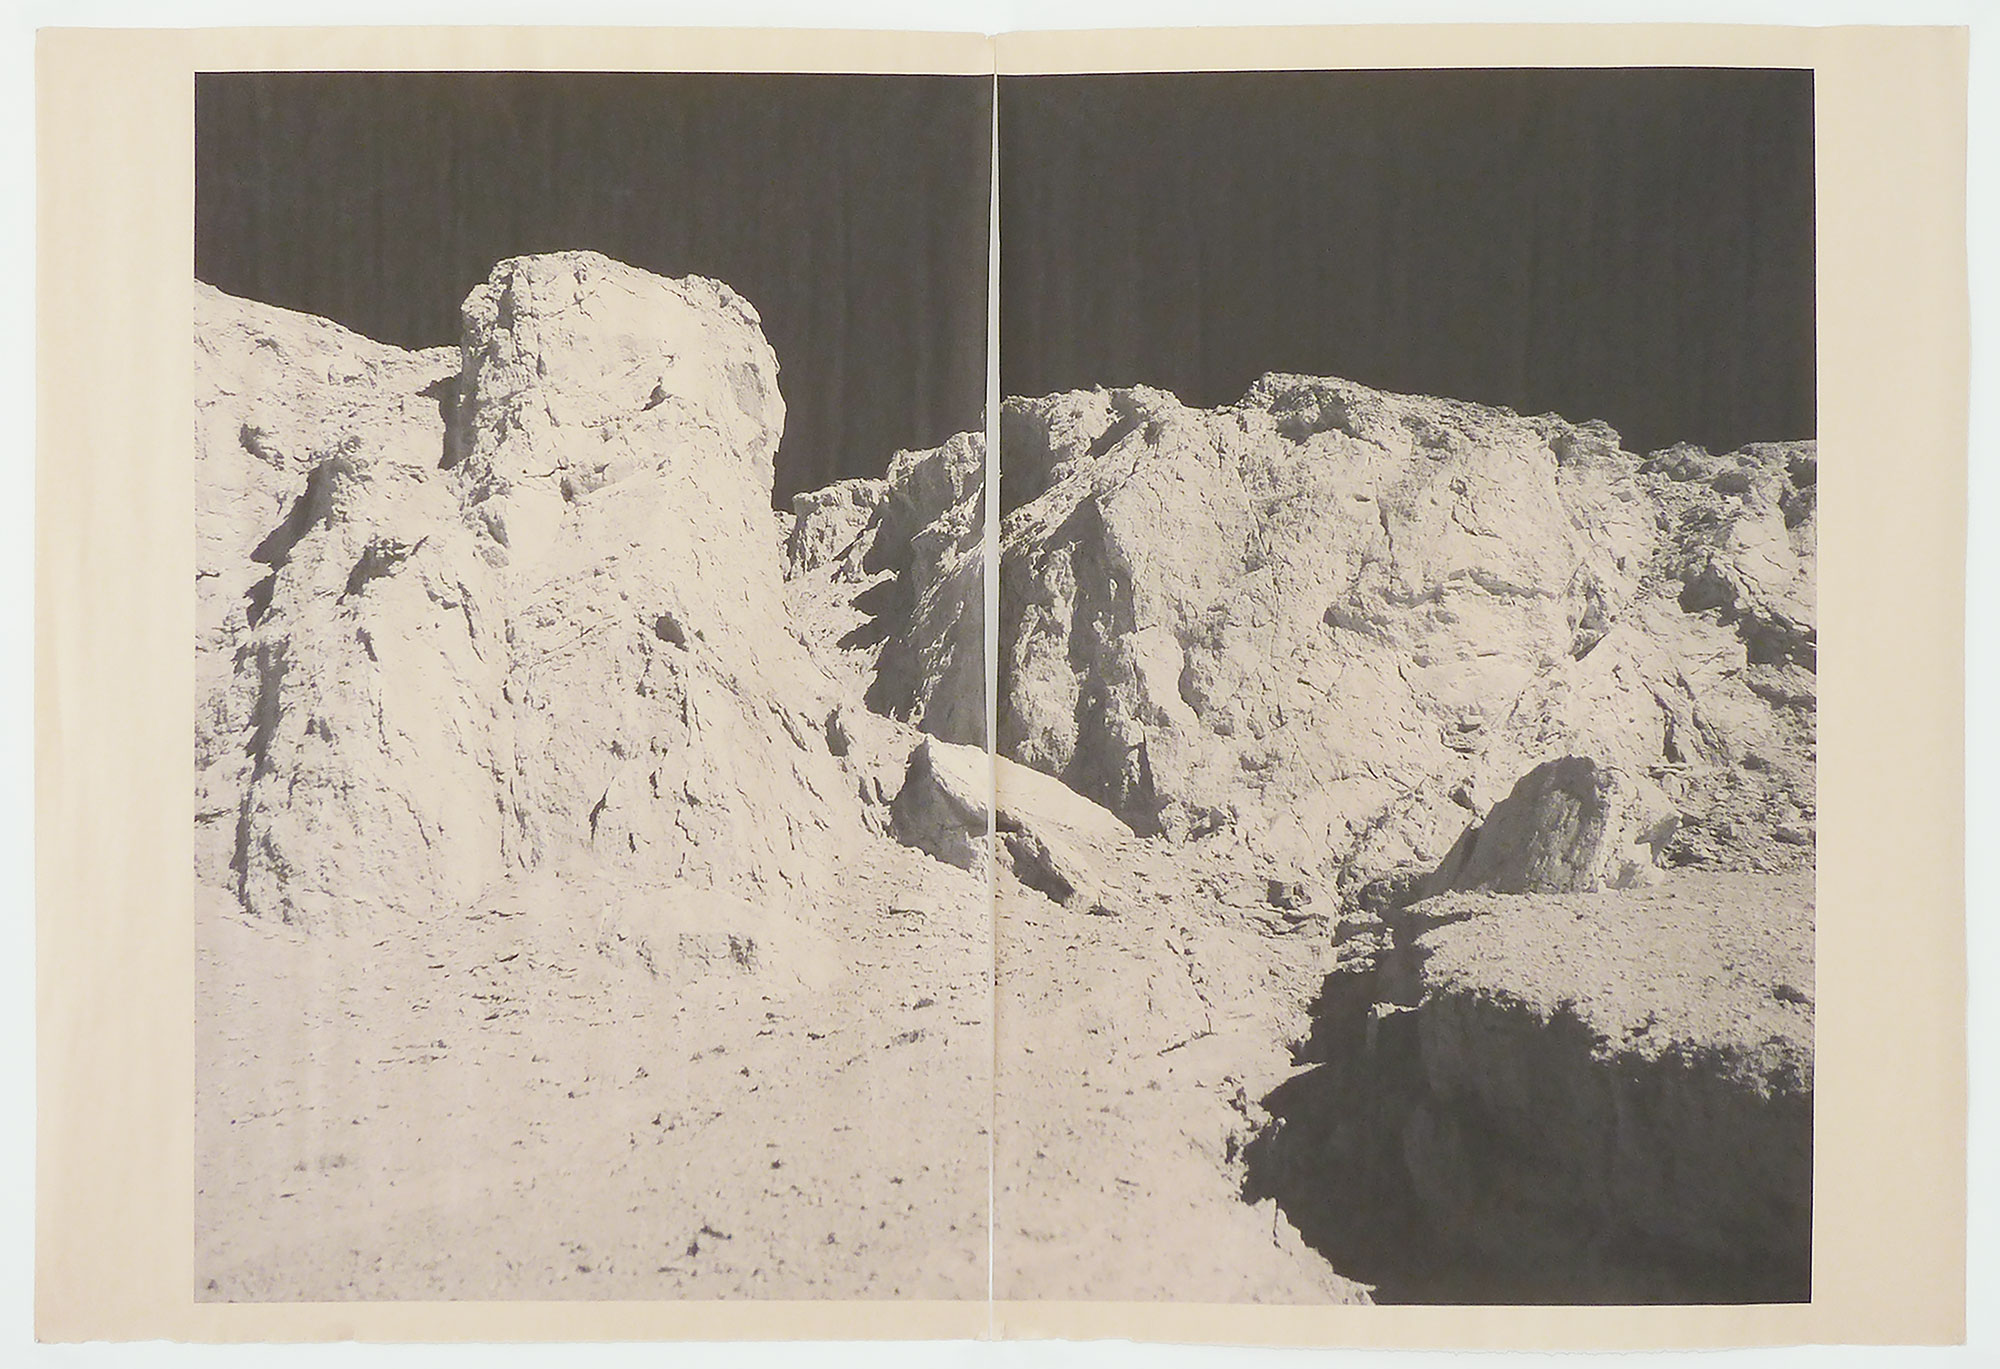   DV_7276,  unique diptych print on newsprint, 36 x 24 inches, 2014 